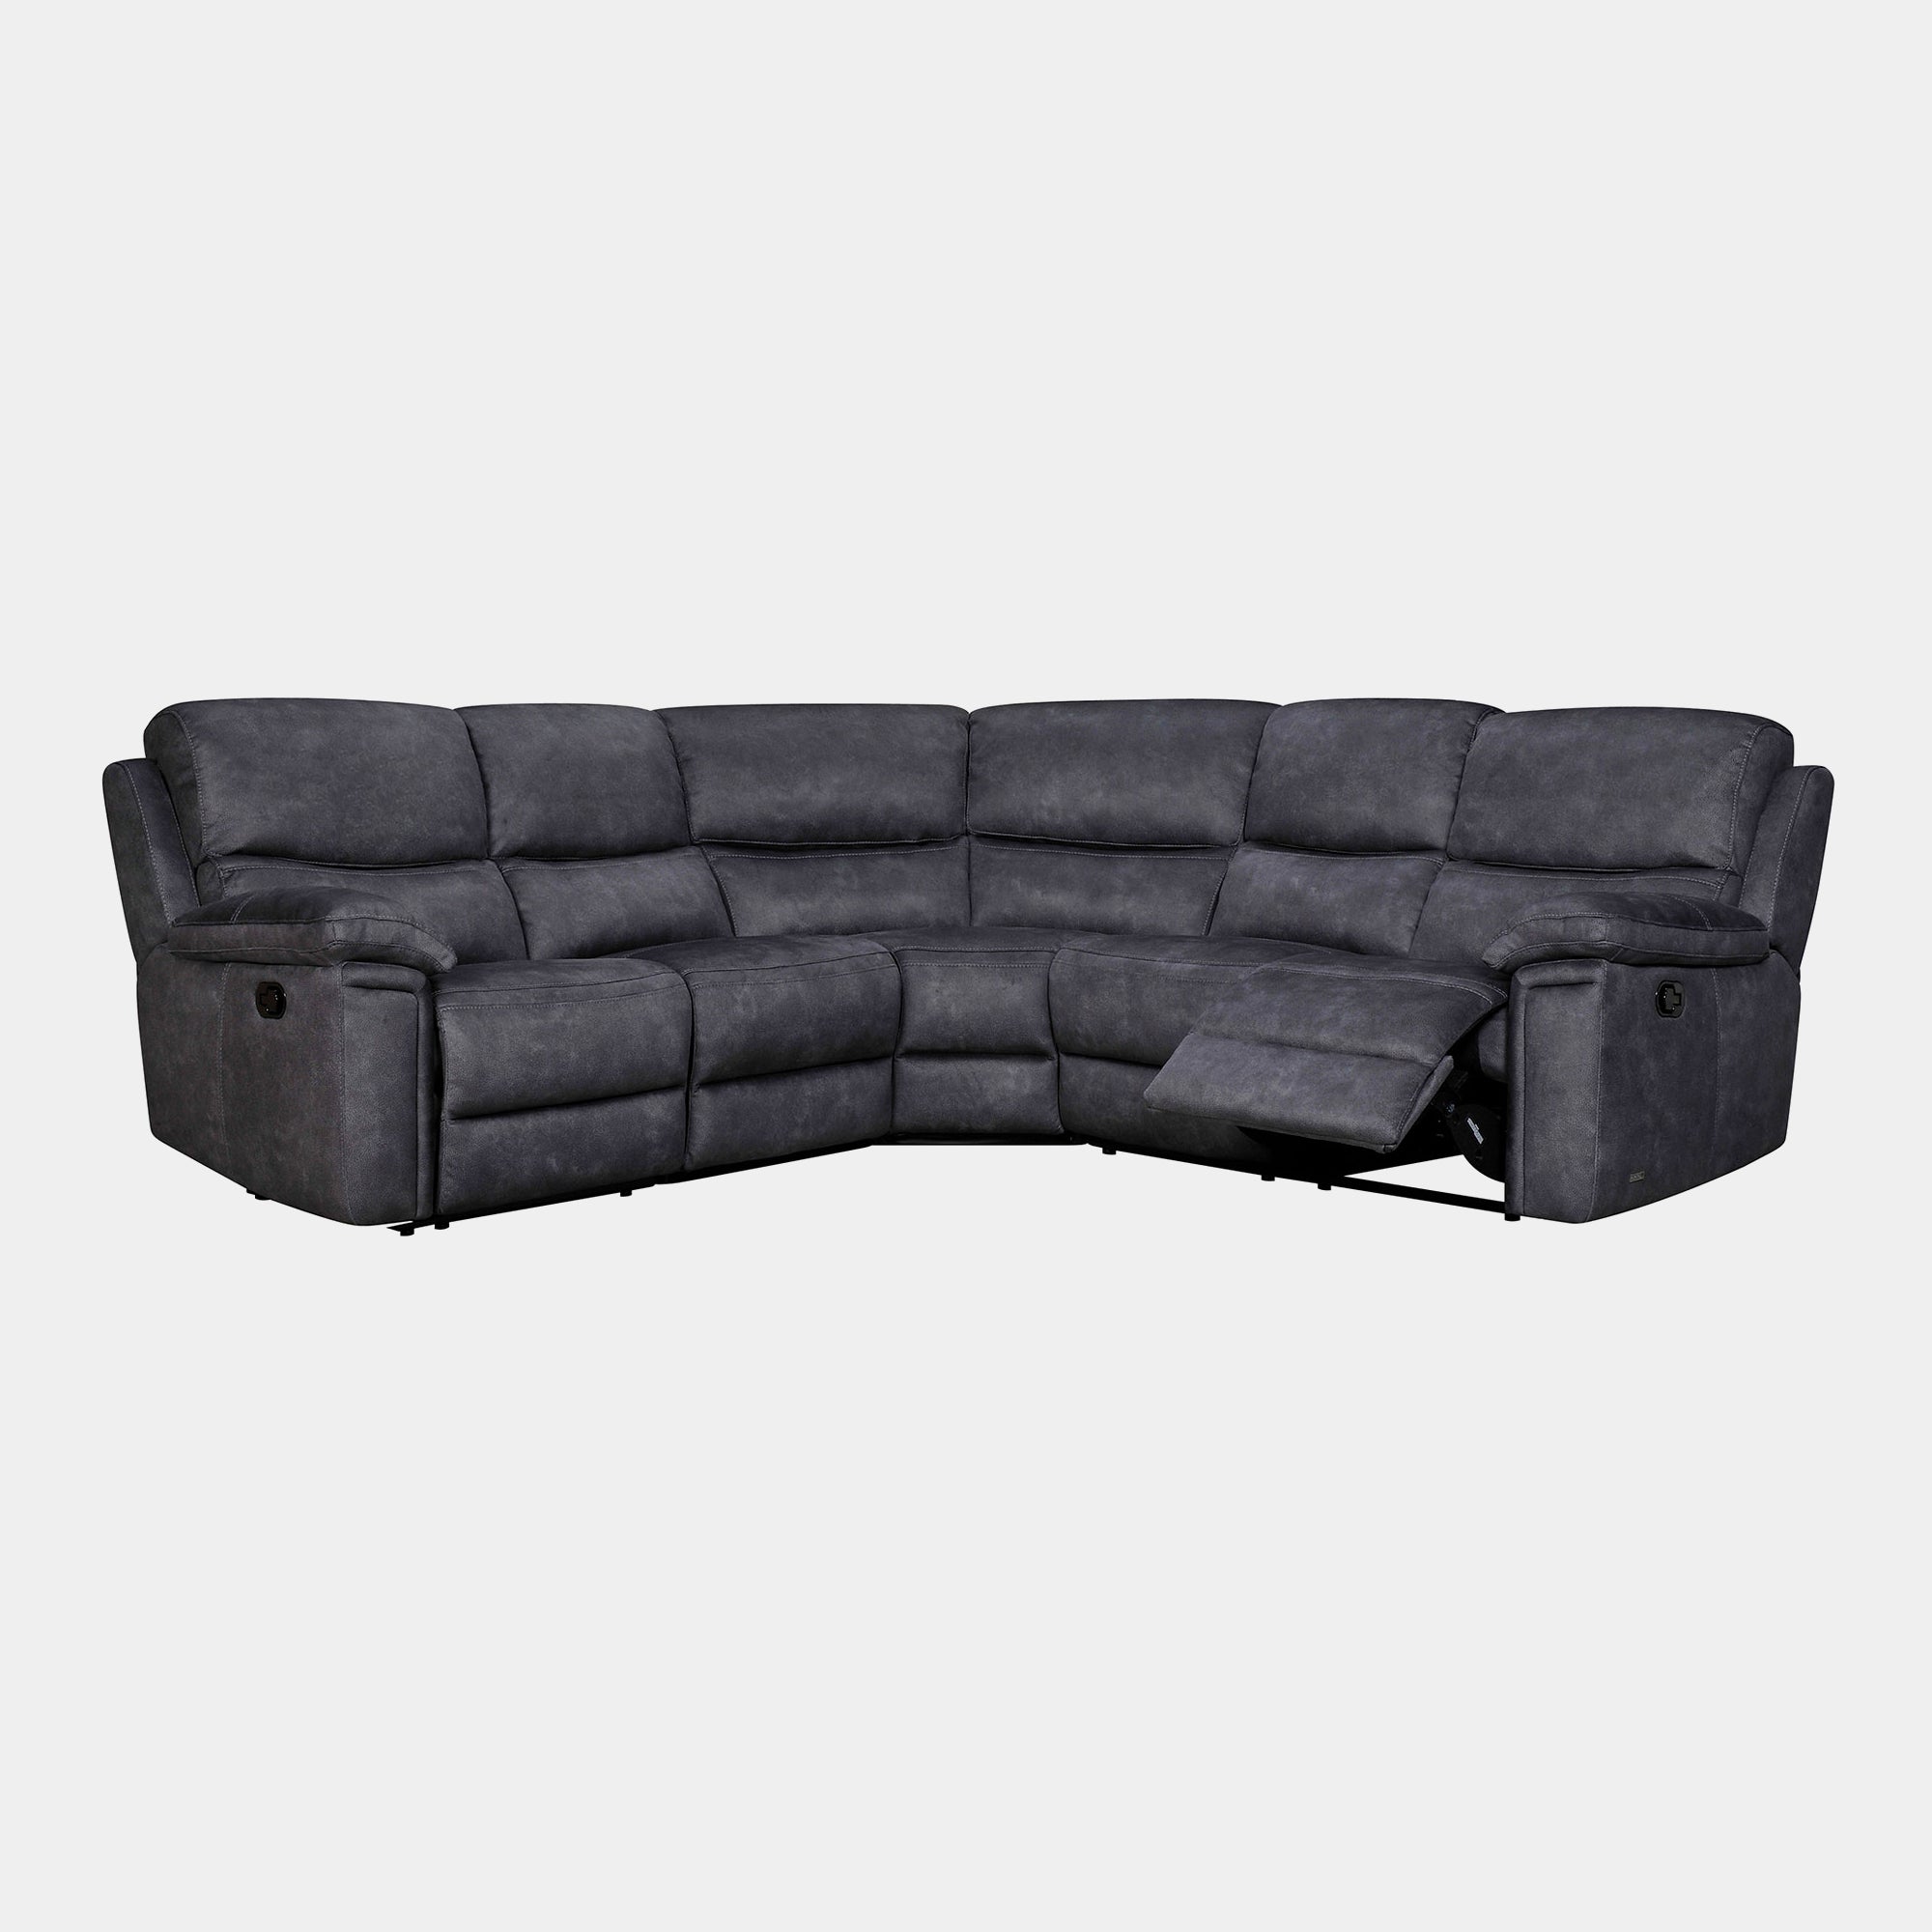 Tampa - 4 Piece RHF Two Manual Recliner Corner Group In Fabric Grade BSF20